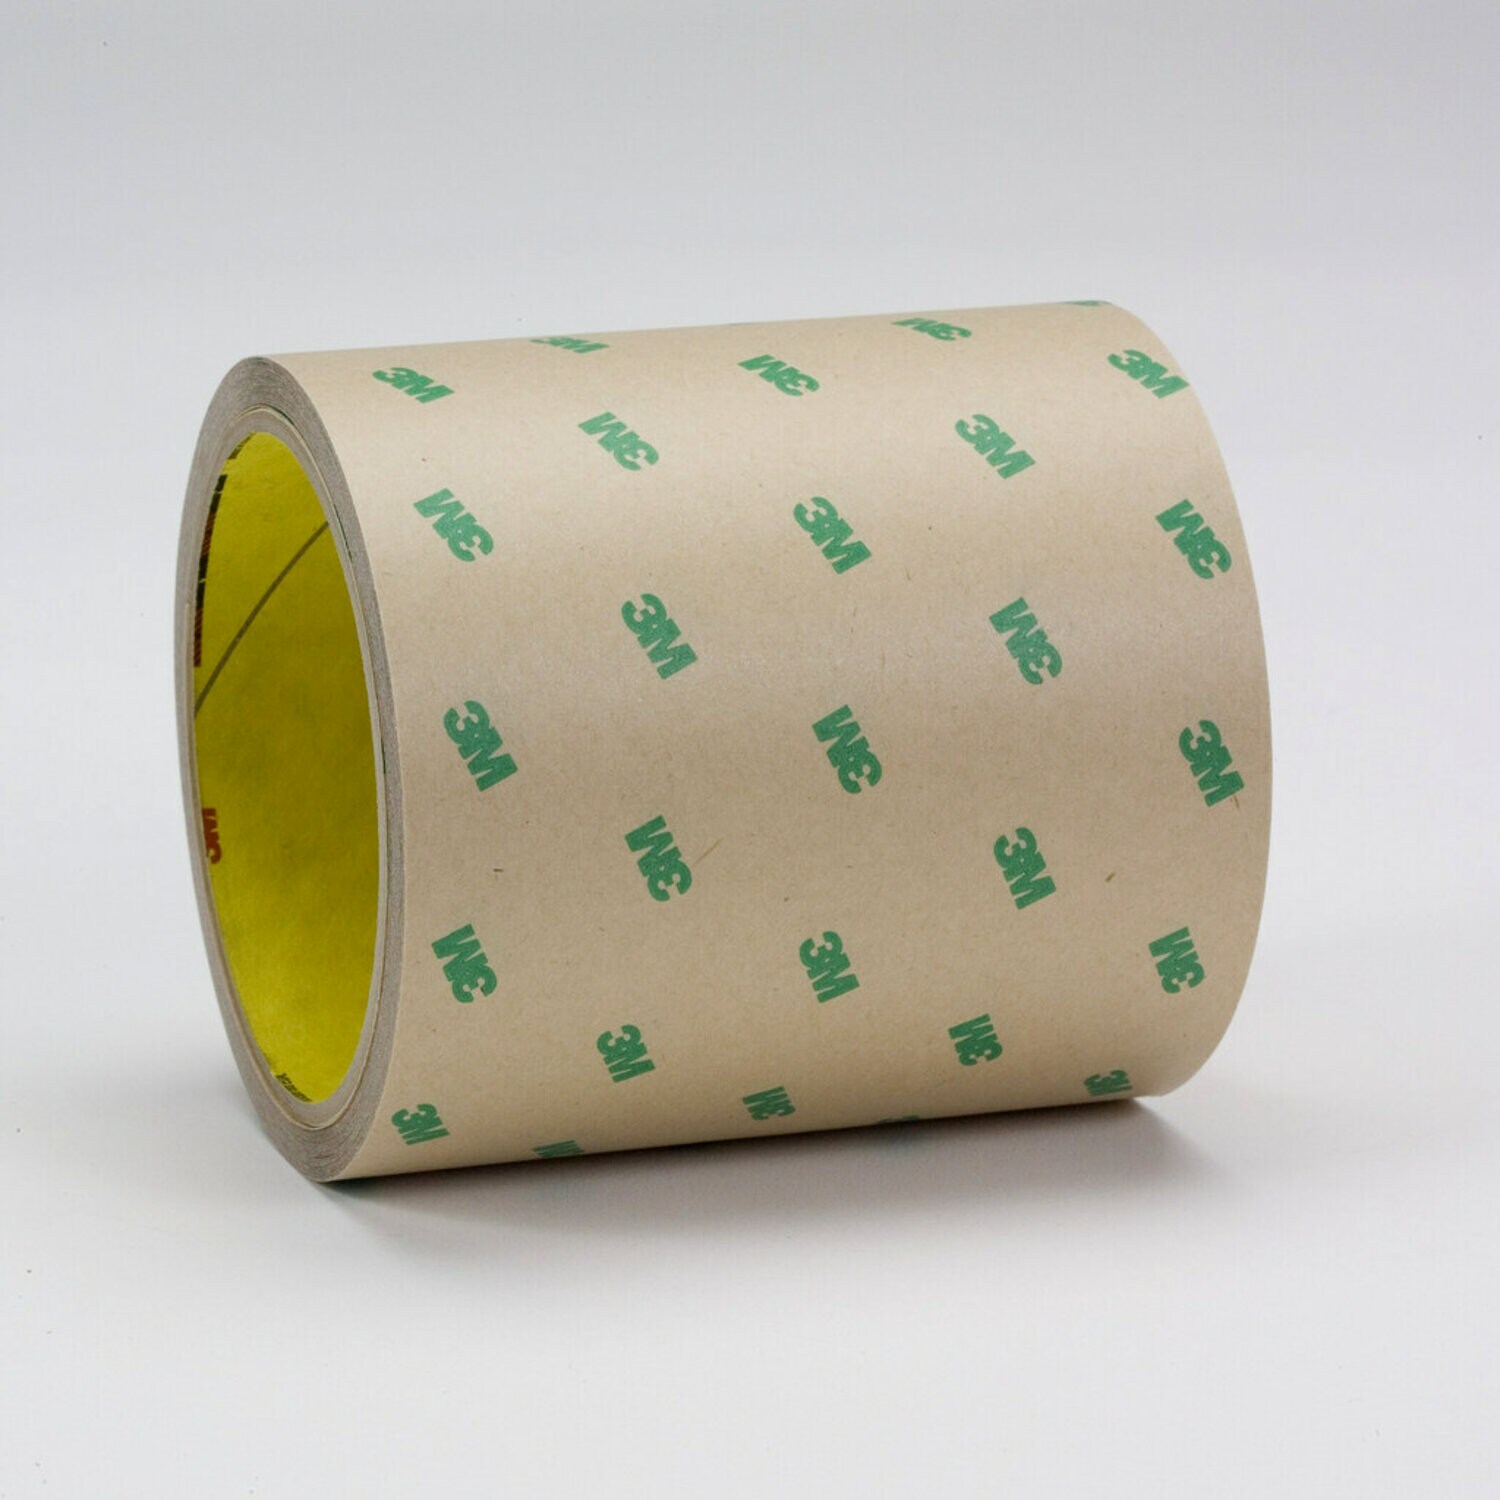 https://www.e-aircraftsupply.com/ItemImages/37/437698E_3mtm-adhesive-transfer-tape-9502.jpg